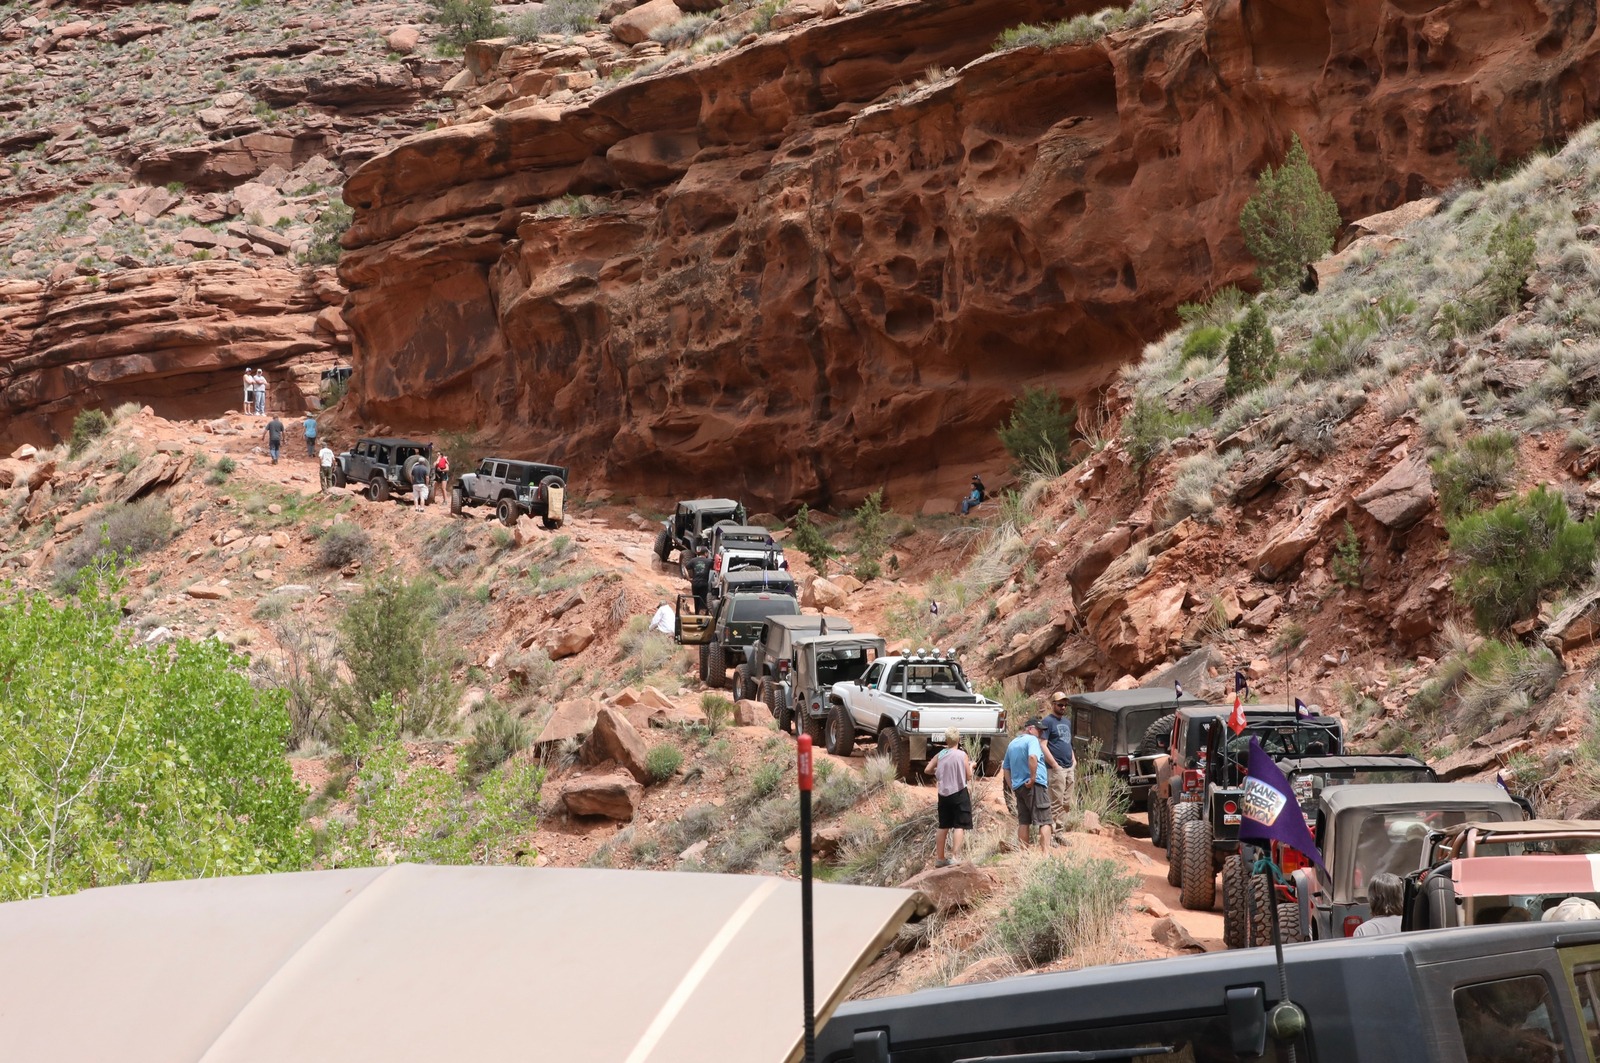 Whether as gym, obstacle course that tests technology, playground or source of income, at what point does the wild caliber of nature and the things living inside it fade to irrelevance?  Here, on Easter weekend 2019, a group of  4 X 4  off-road jeep enthusiasts take part in their annual "running Kane Creek" event near Moab, Utah. The outdoor recreation industry is behind several bills that would compel federal land management agencies to expand recreation, in unprecedented ways, across the West. Photo from Shutterstock/1409152925